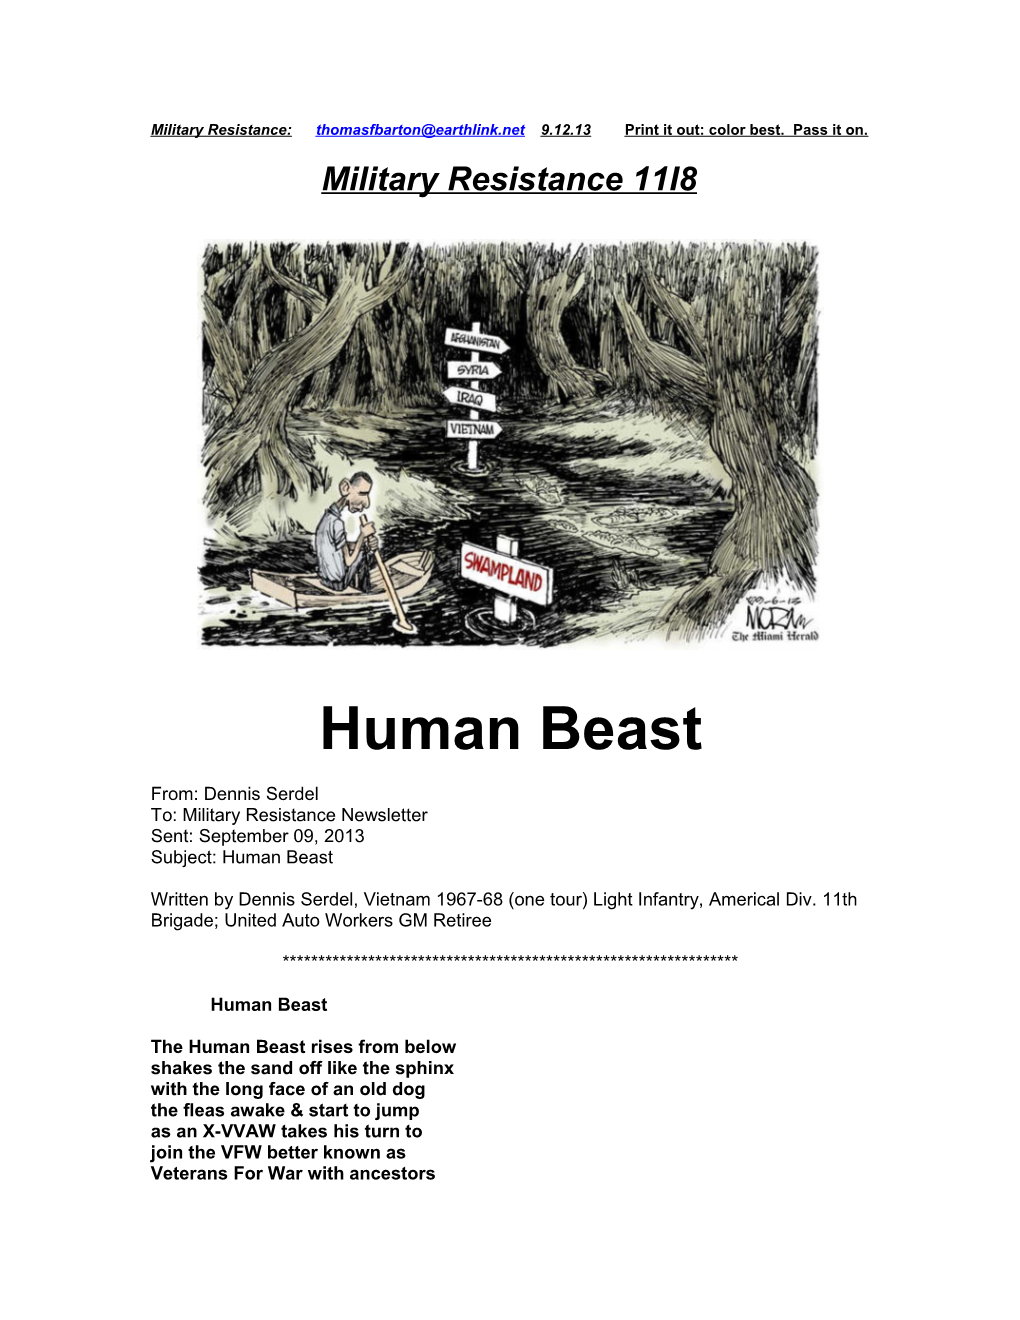 Military Resistance 11I8